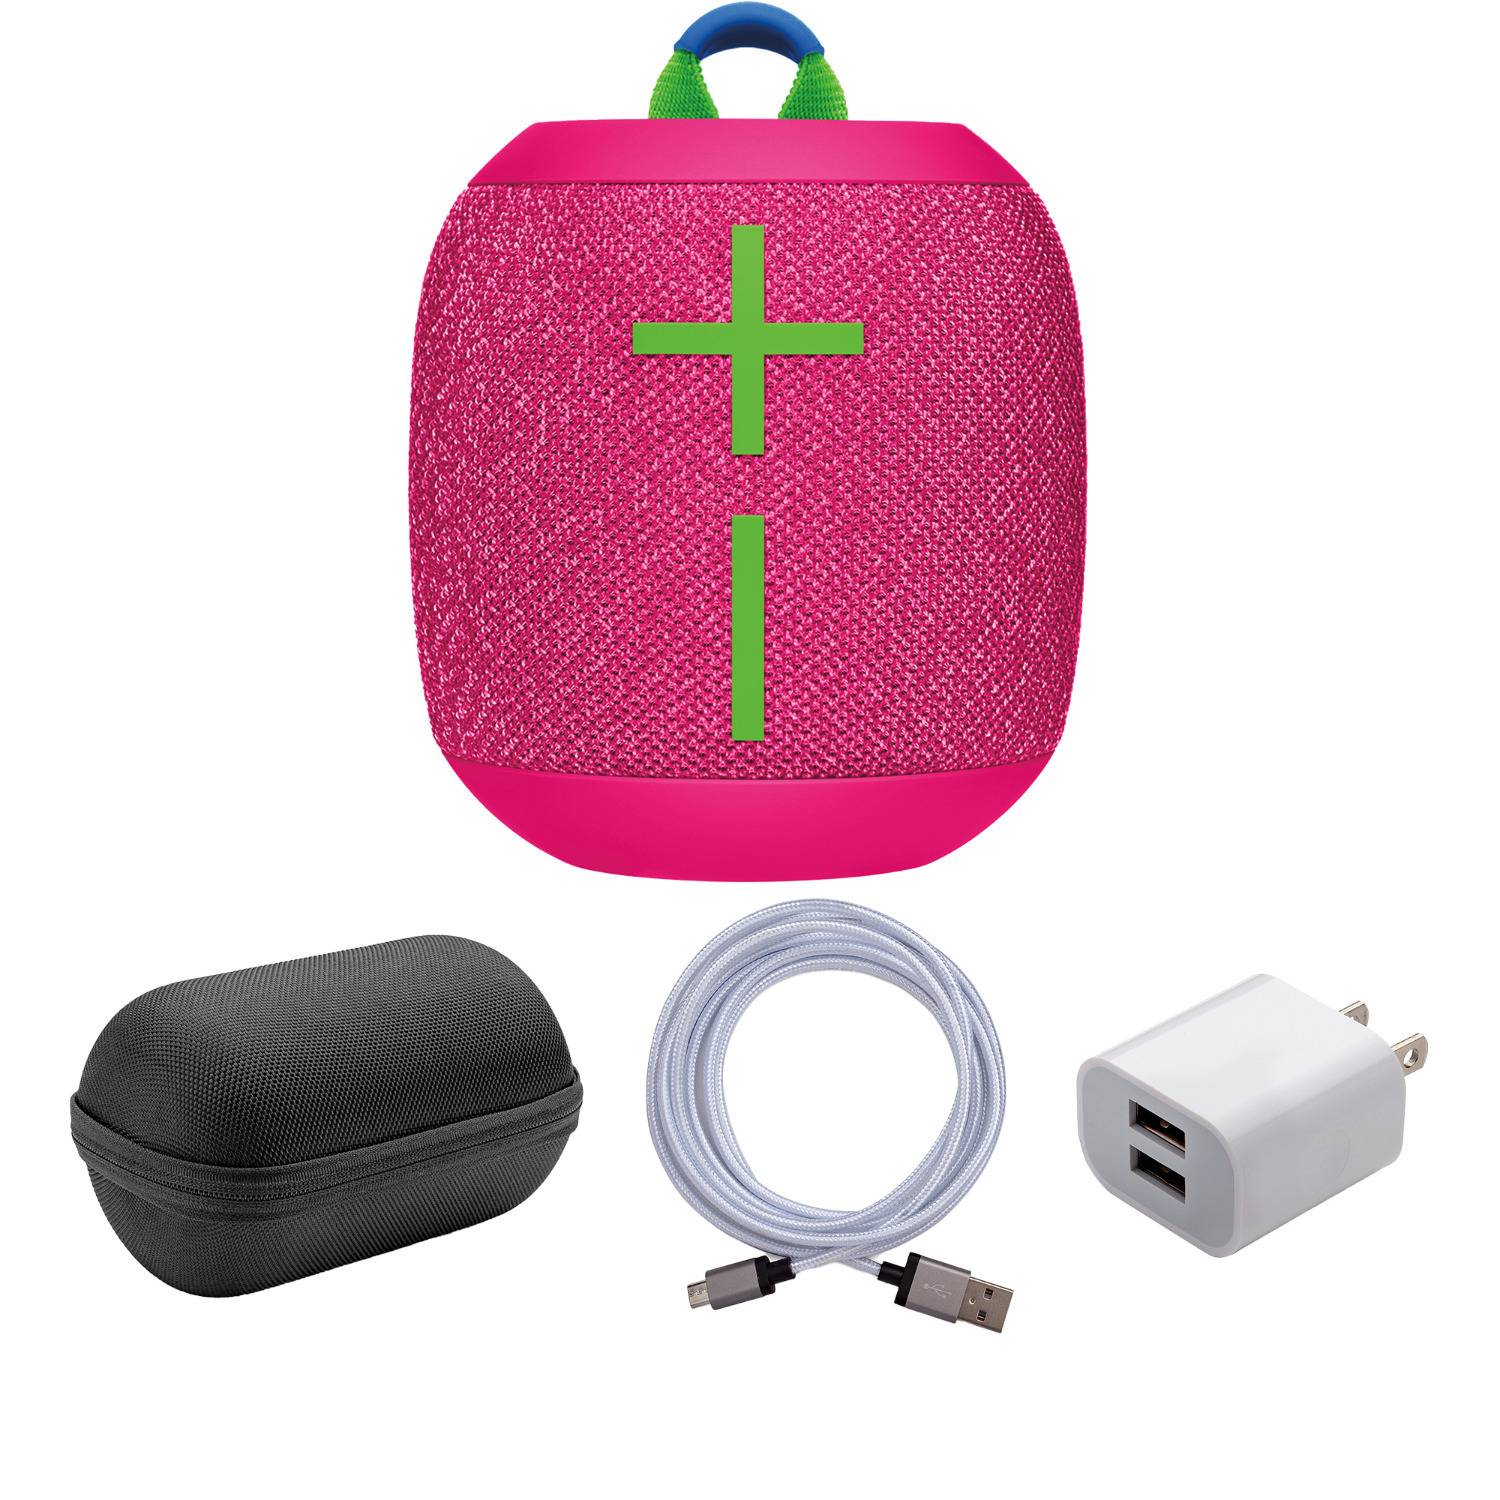 Ultimate Ears WONDERBOOM 3 Bluetooth Speaker with Knox Case, USB Cable and Adapter (Hyper Pink)